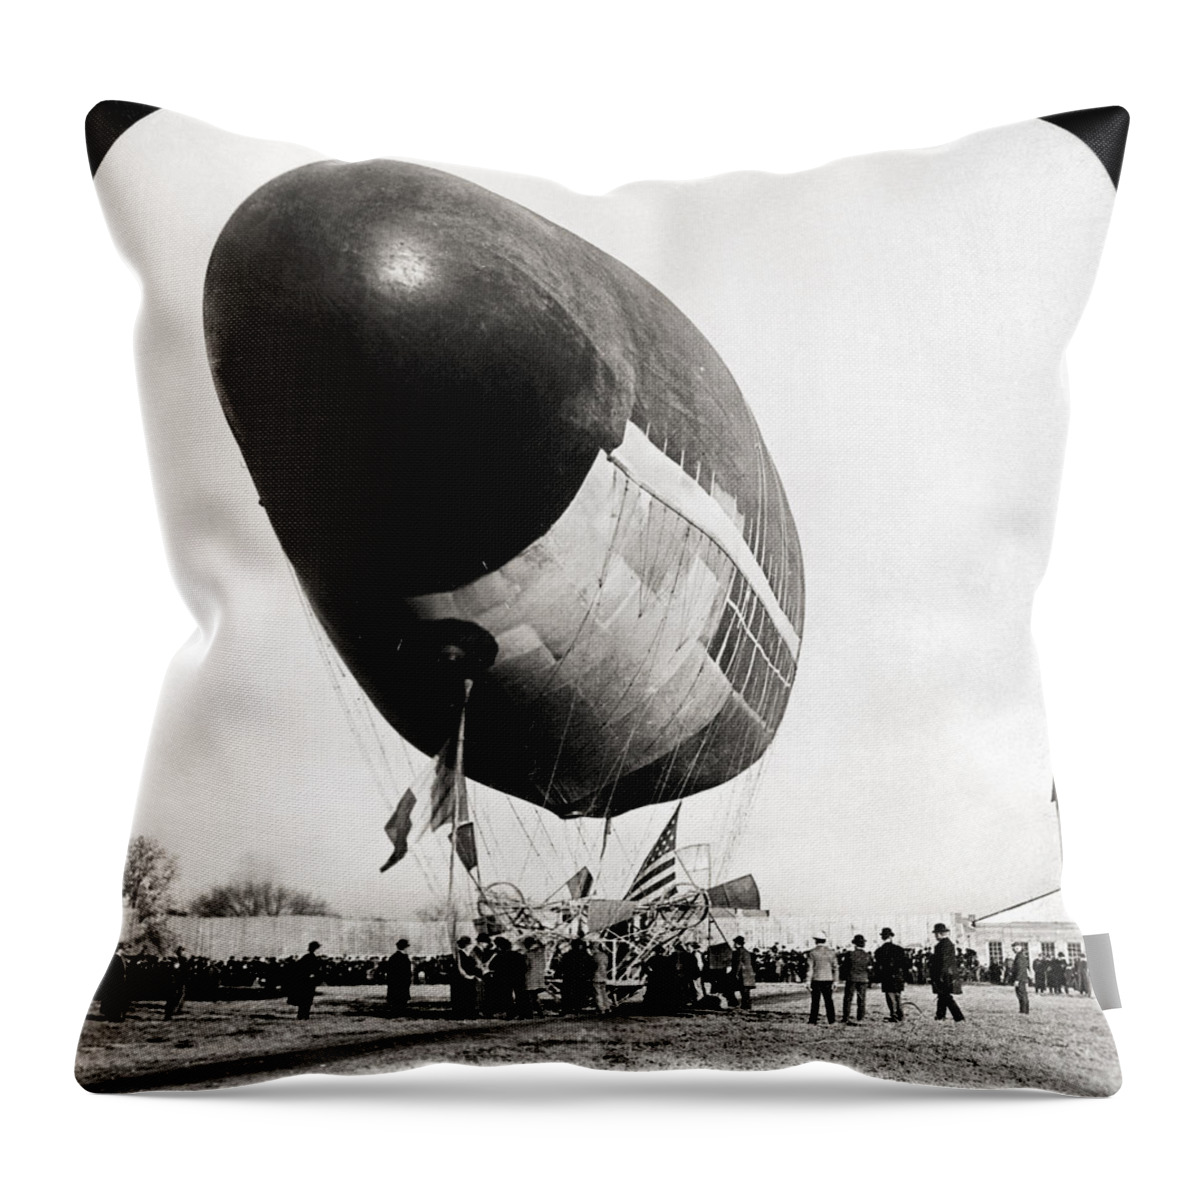 1904 Throw Pillow featuring the photograph Francois Airship, 1904 by Granger